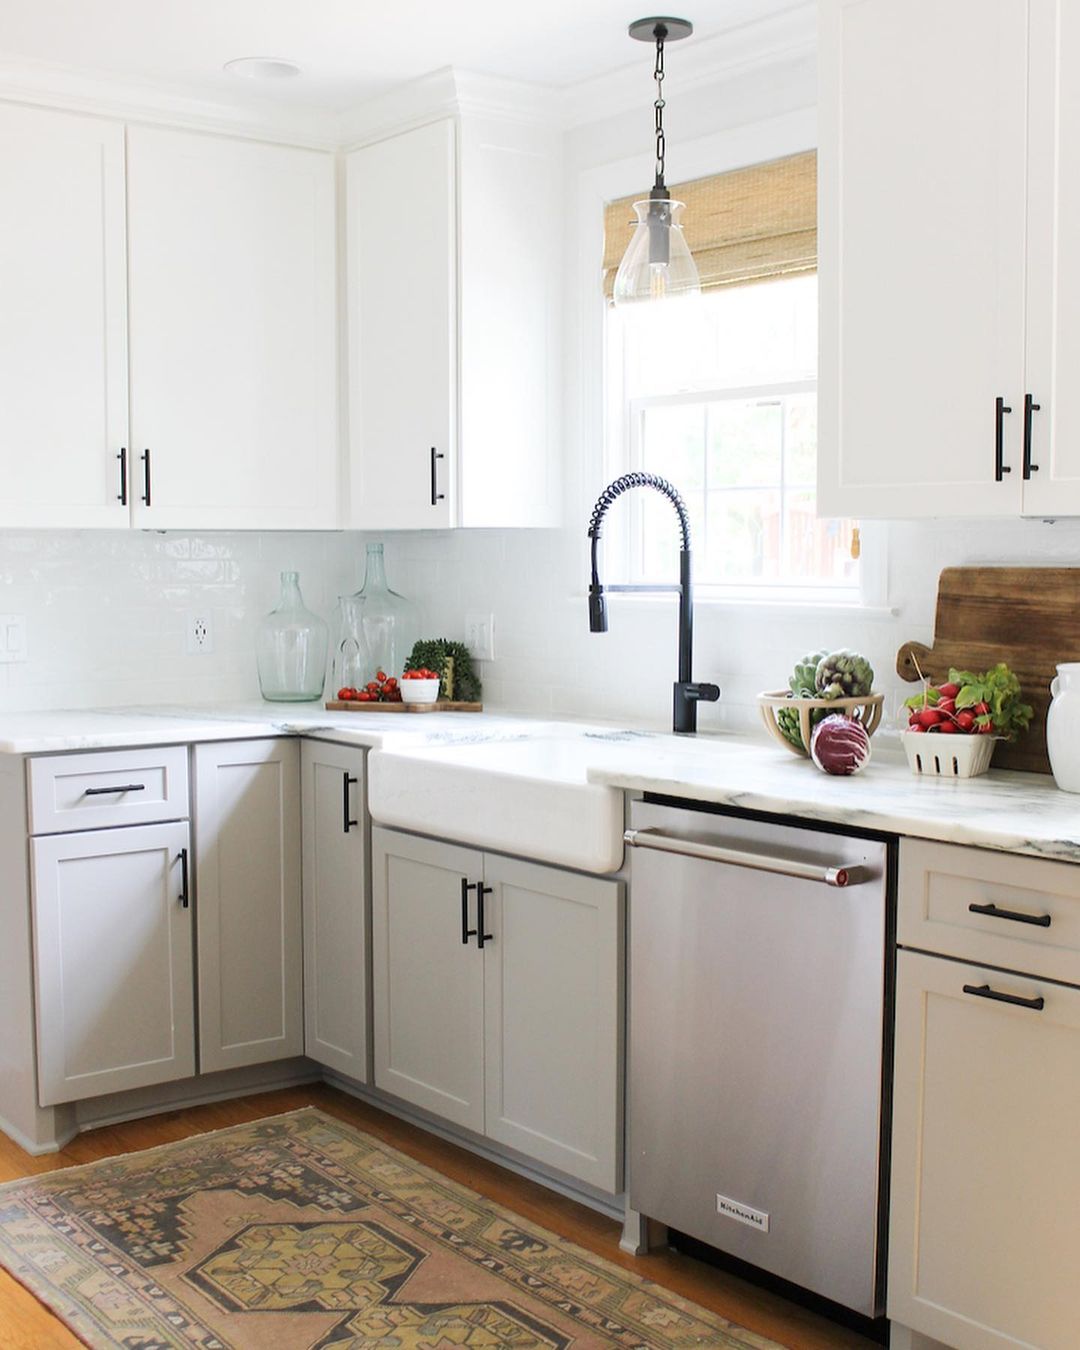 Updated Kitchen with Refaced White Cabinets with Black Pulls. Photo by Instagram user @melissawhitted.interiors